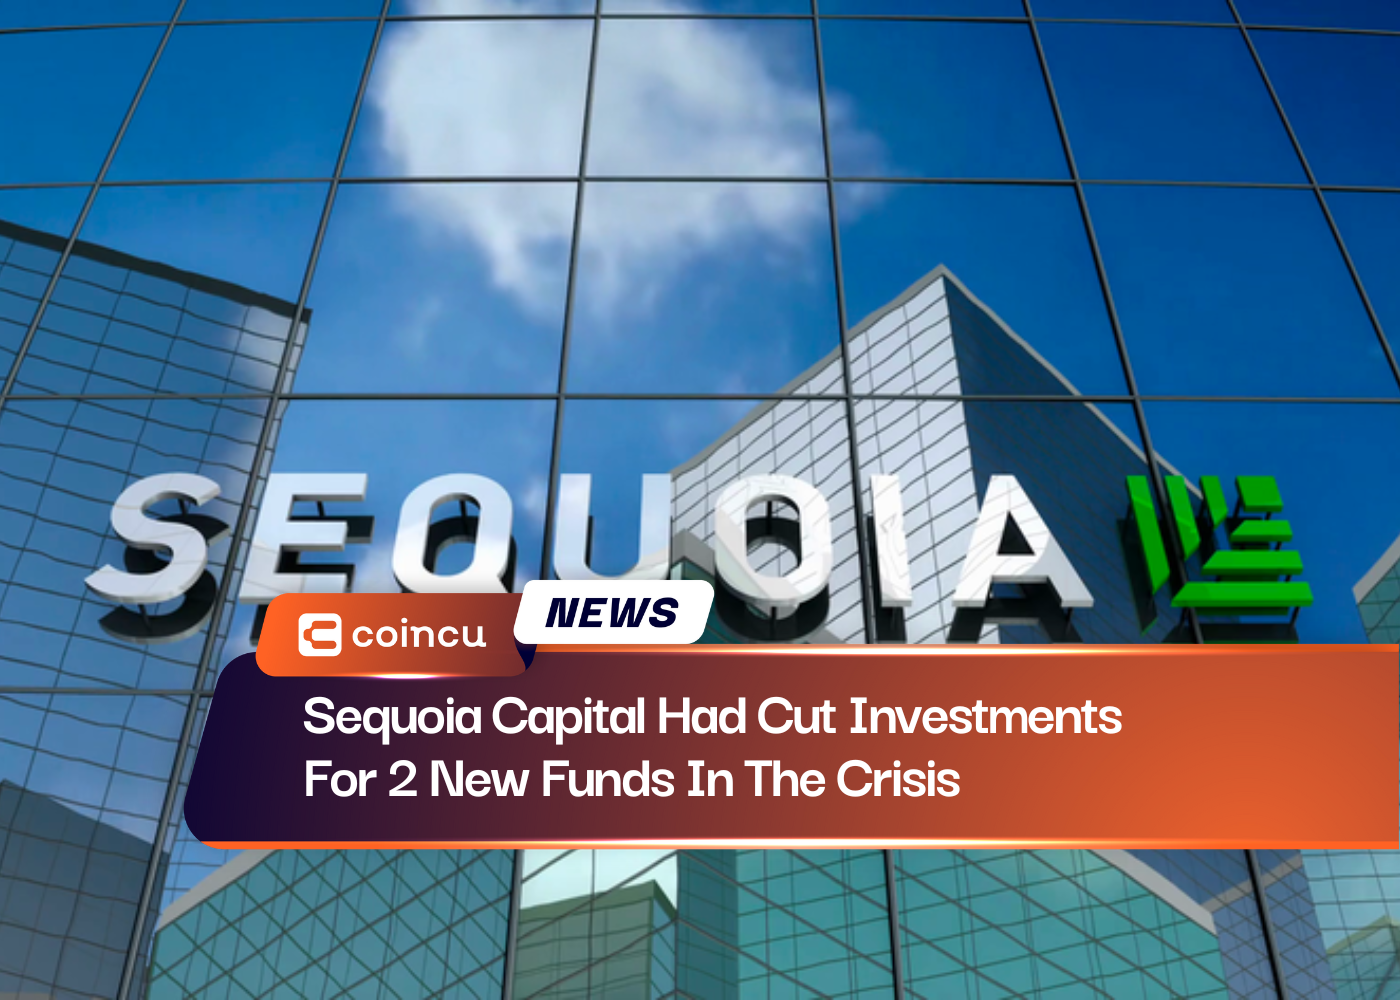 Sequoia Capital Had Cut Investments For 2 New Funds In The Crisis